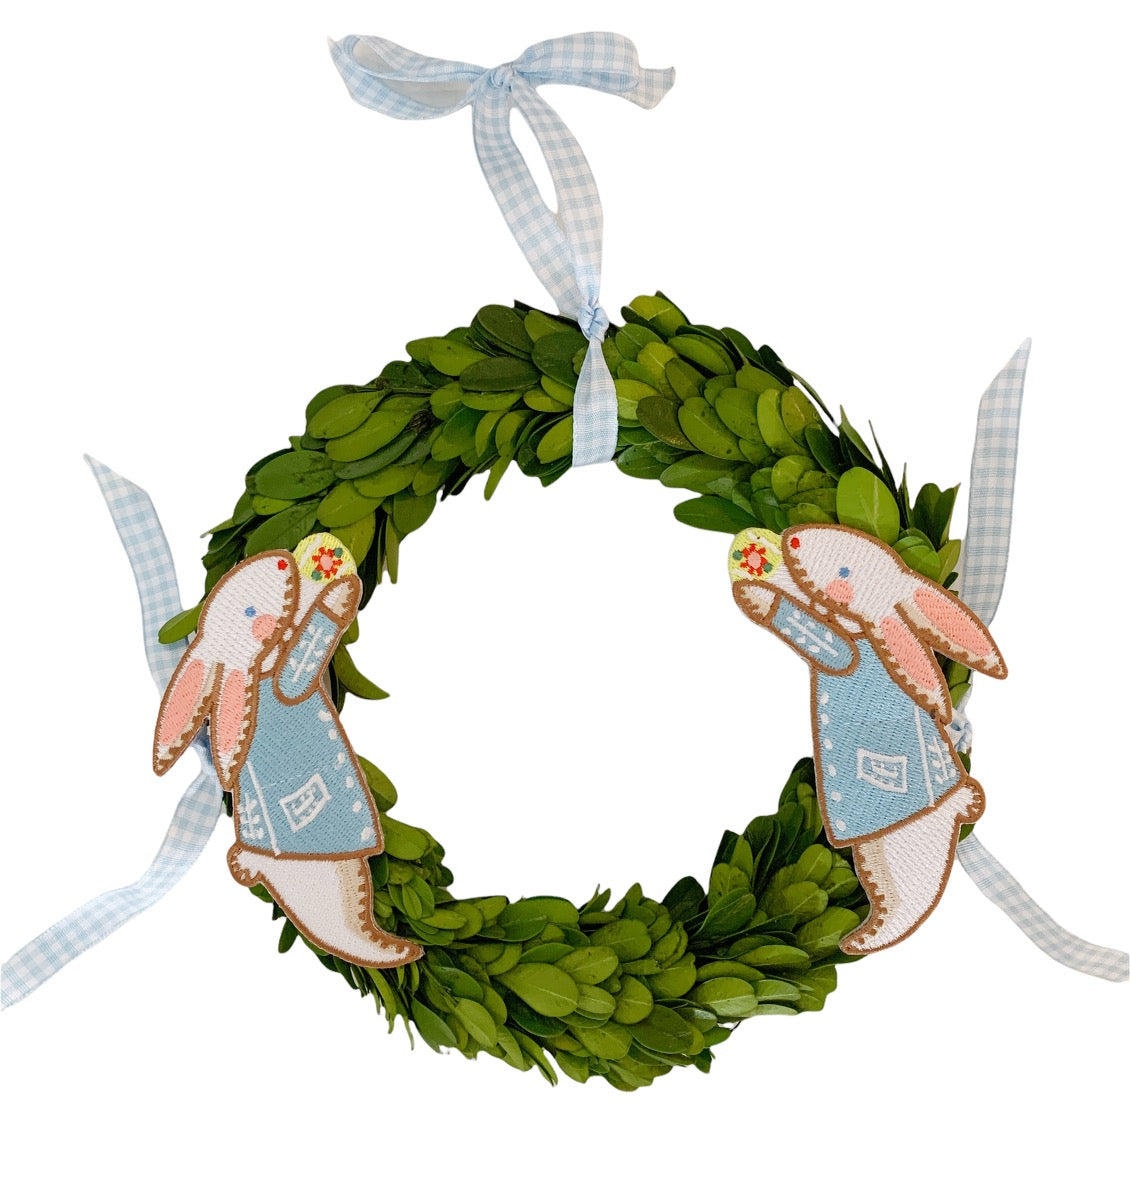 Embroidered Bunny Family Ornaments on Preserved Laurel Wreath - Premium  from Tricia Lowenfield Design 